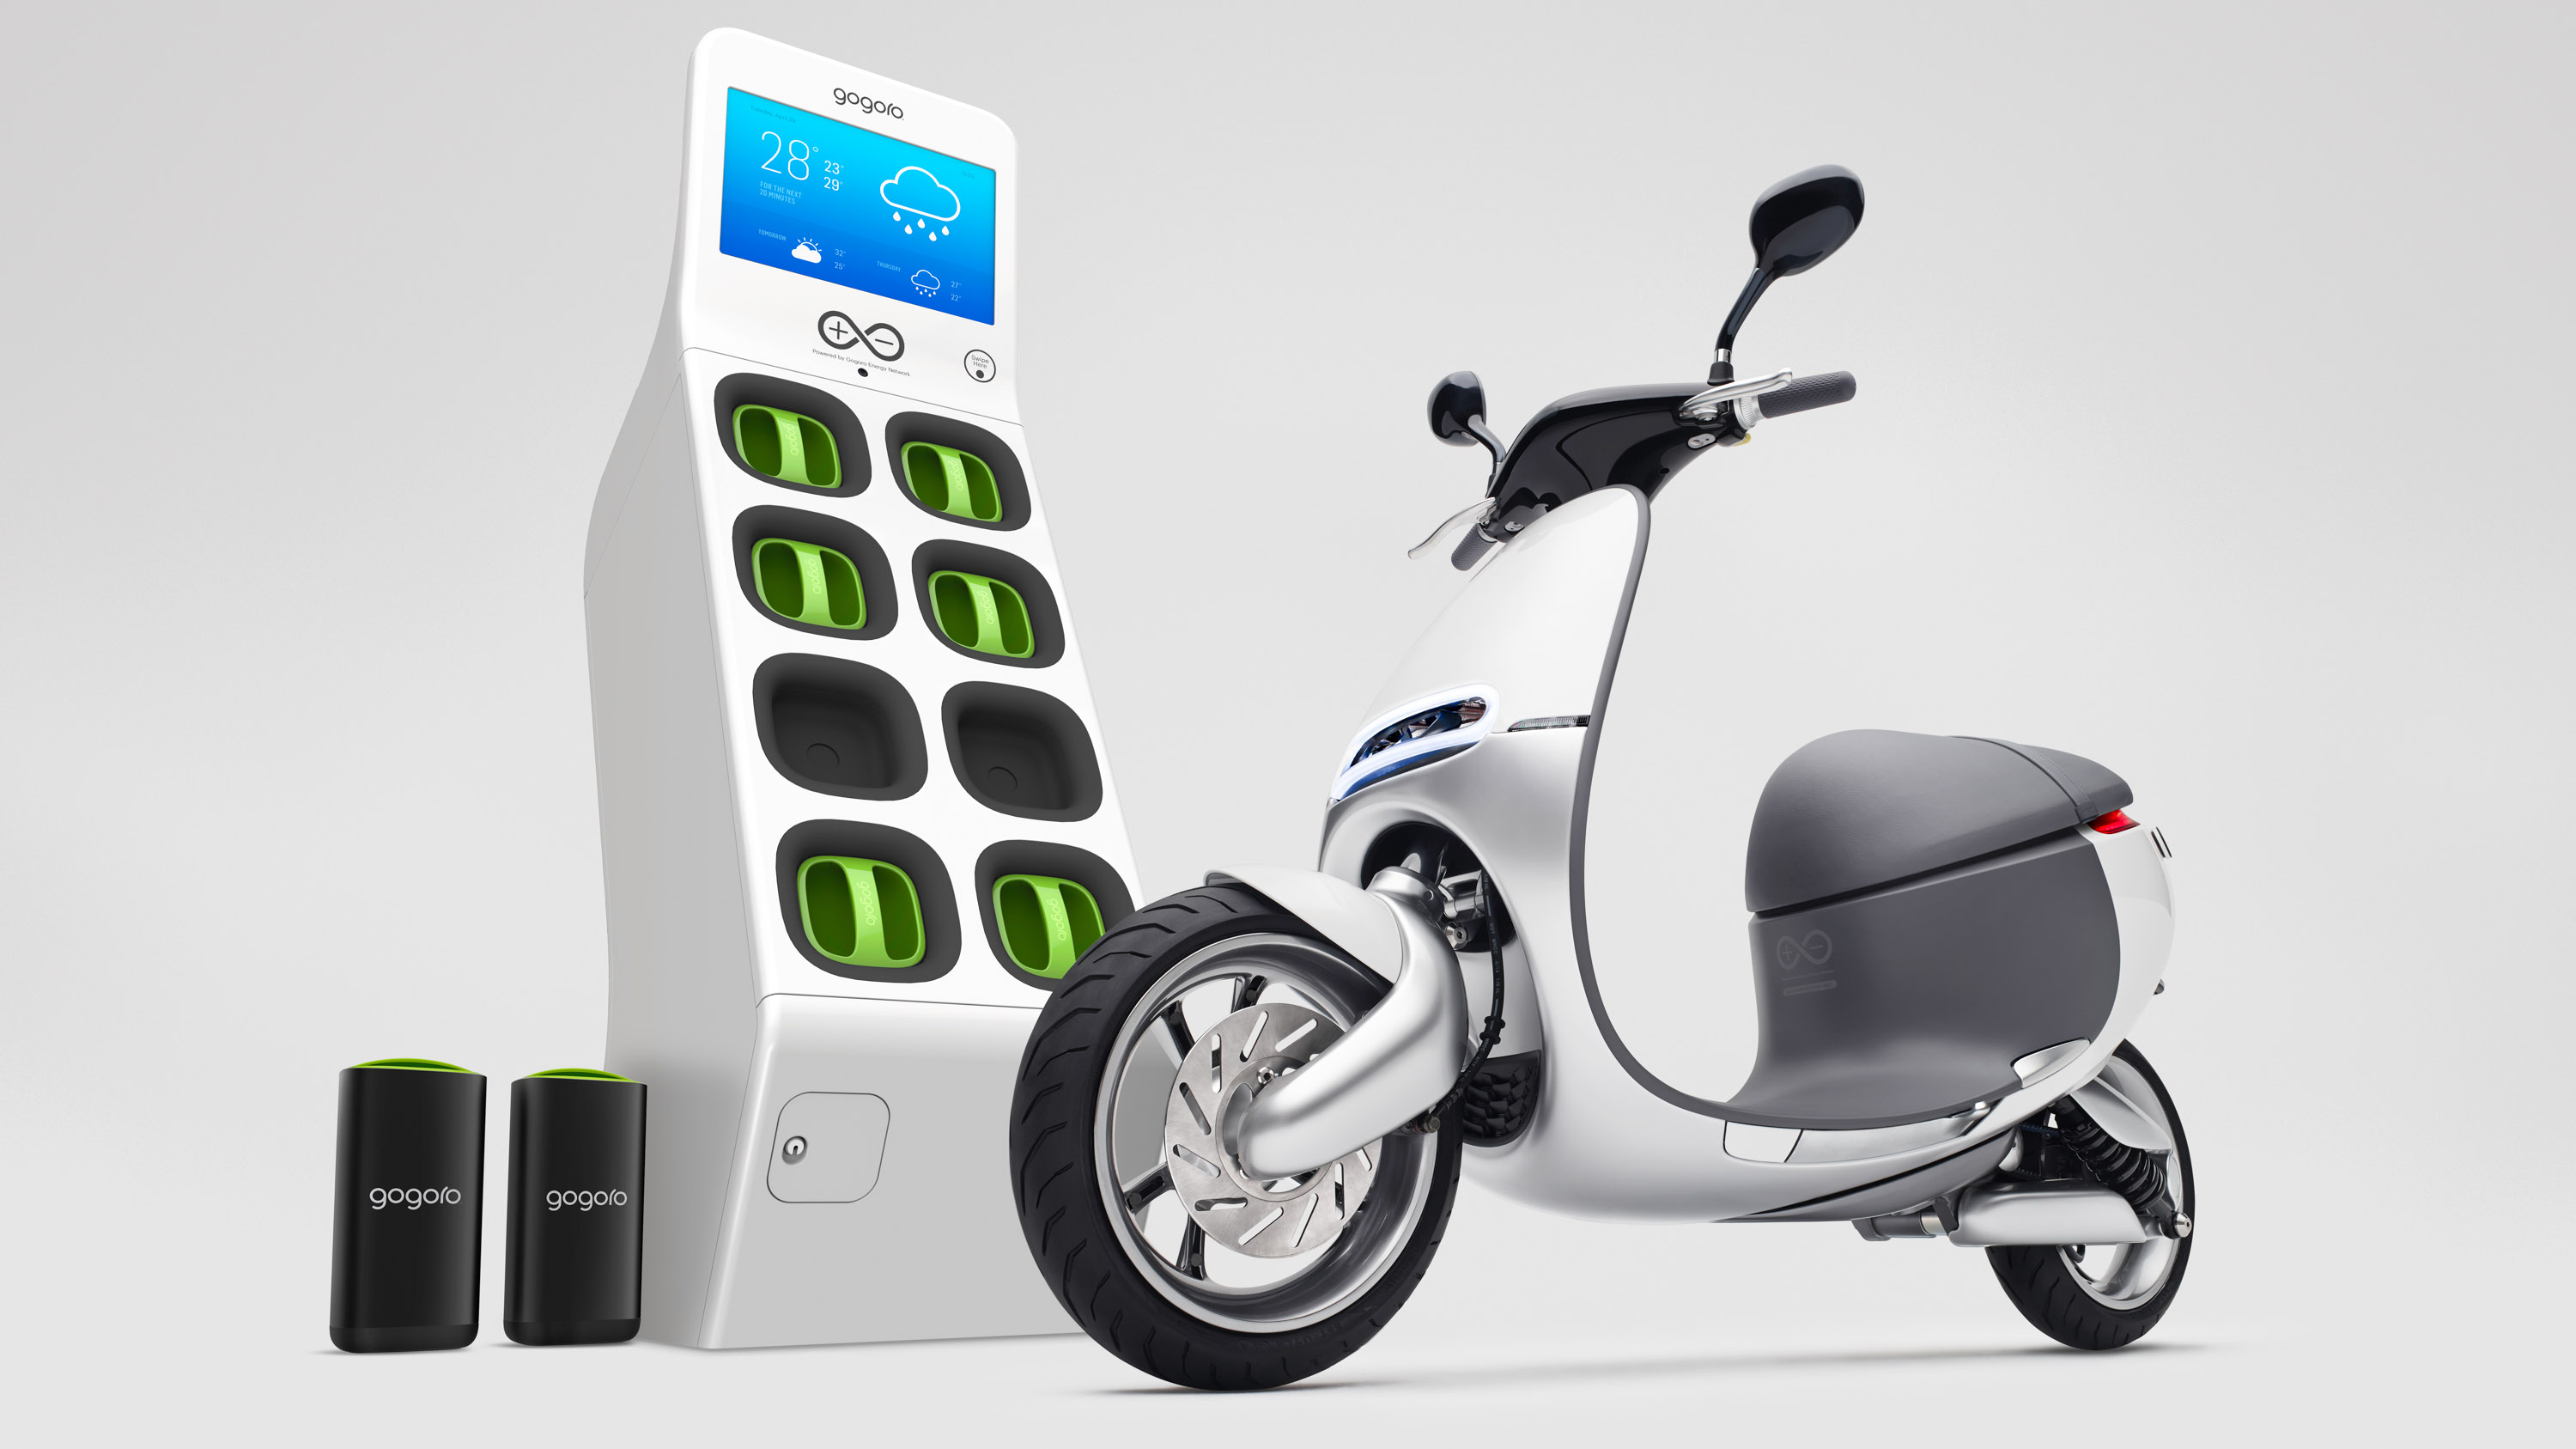 a gogoro scooter, GoStation and batteries